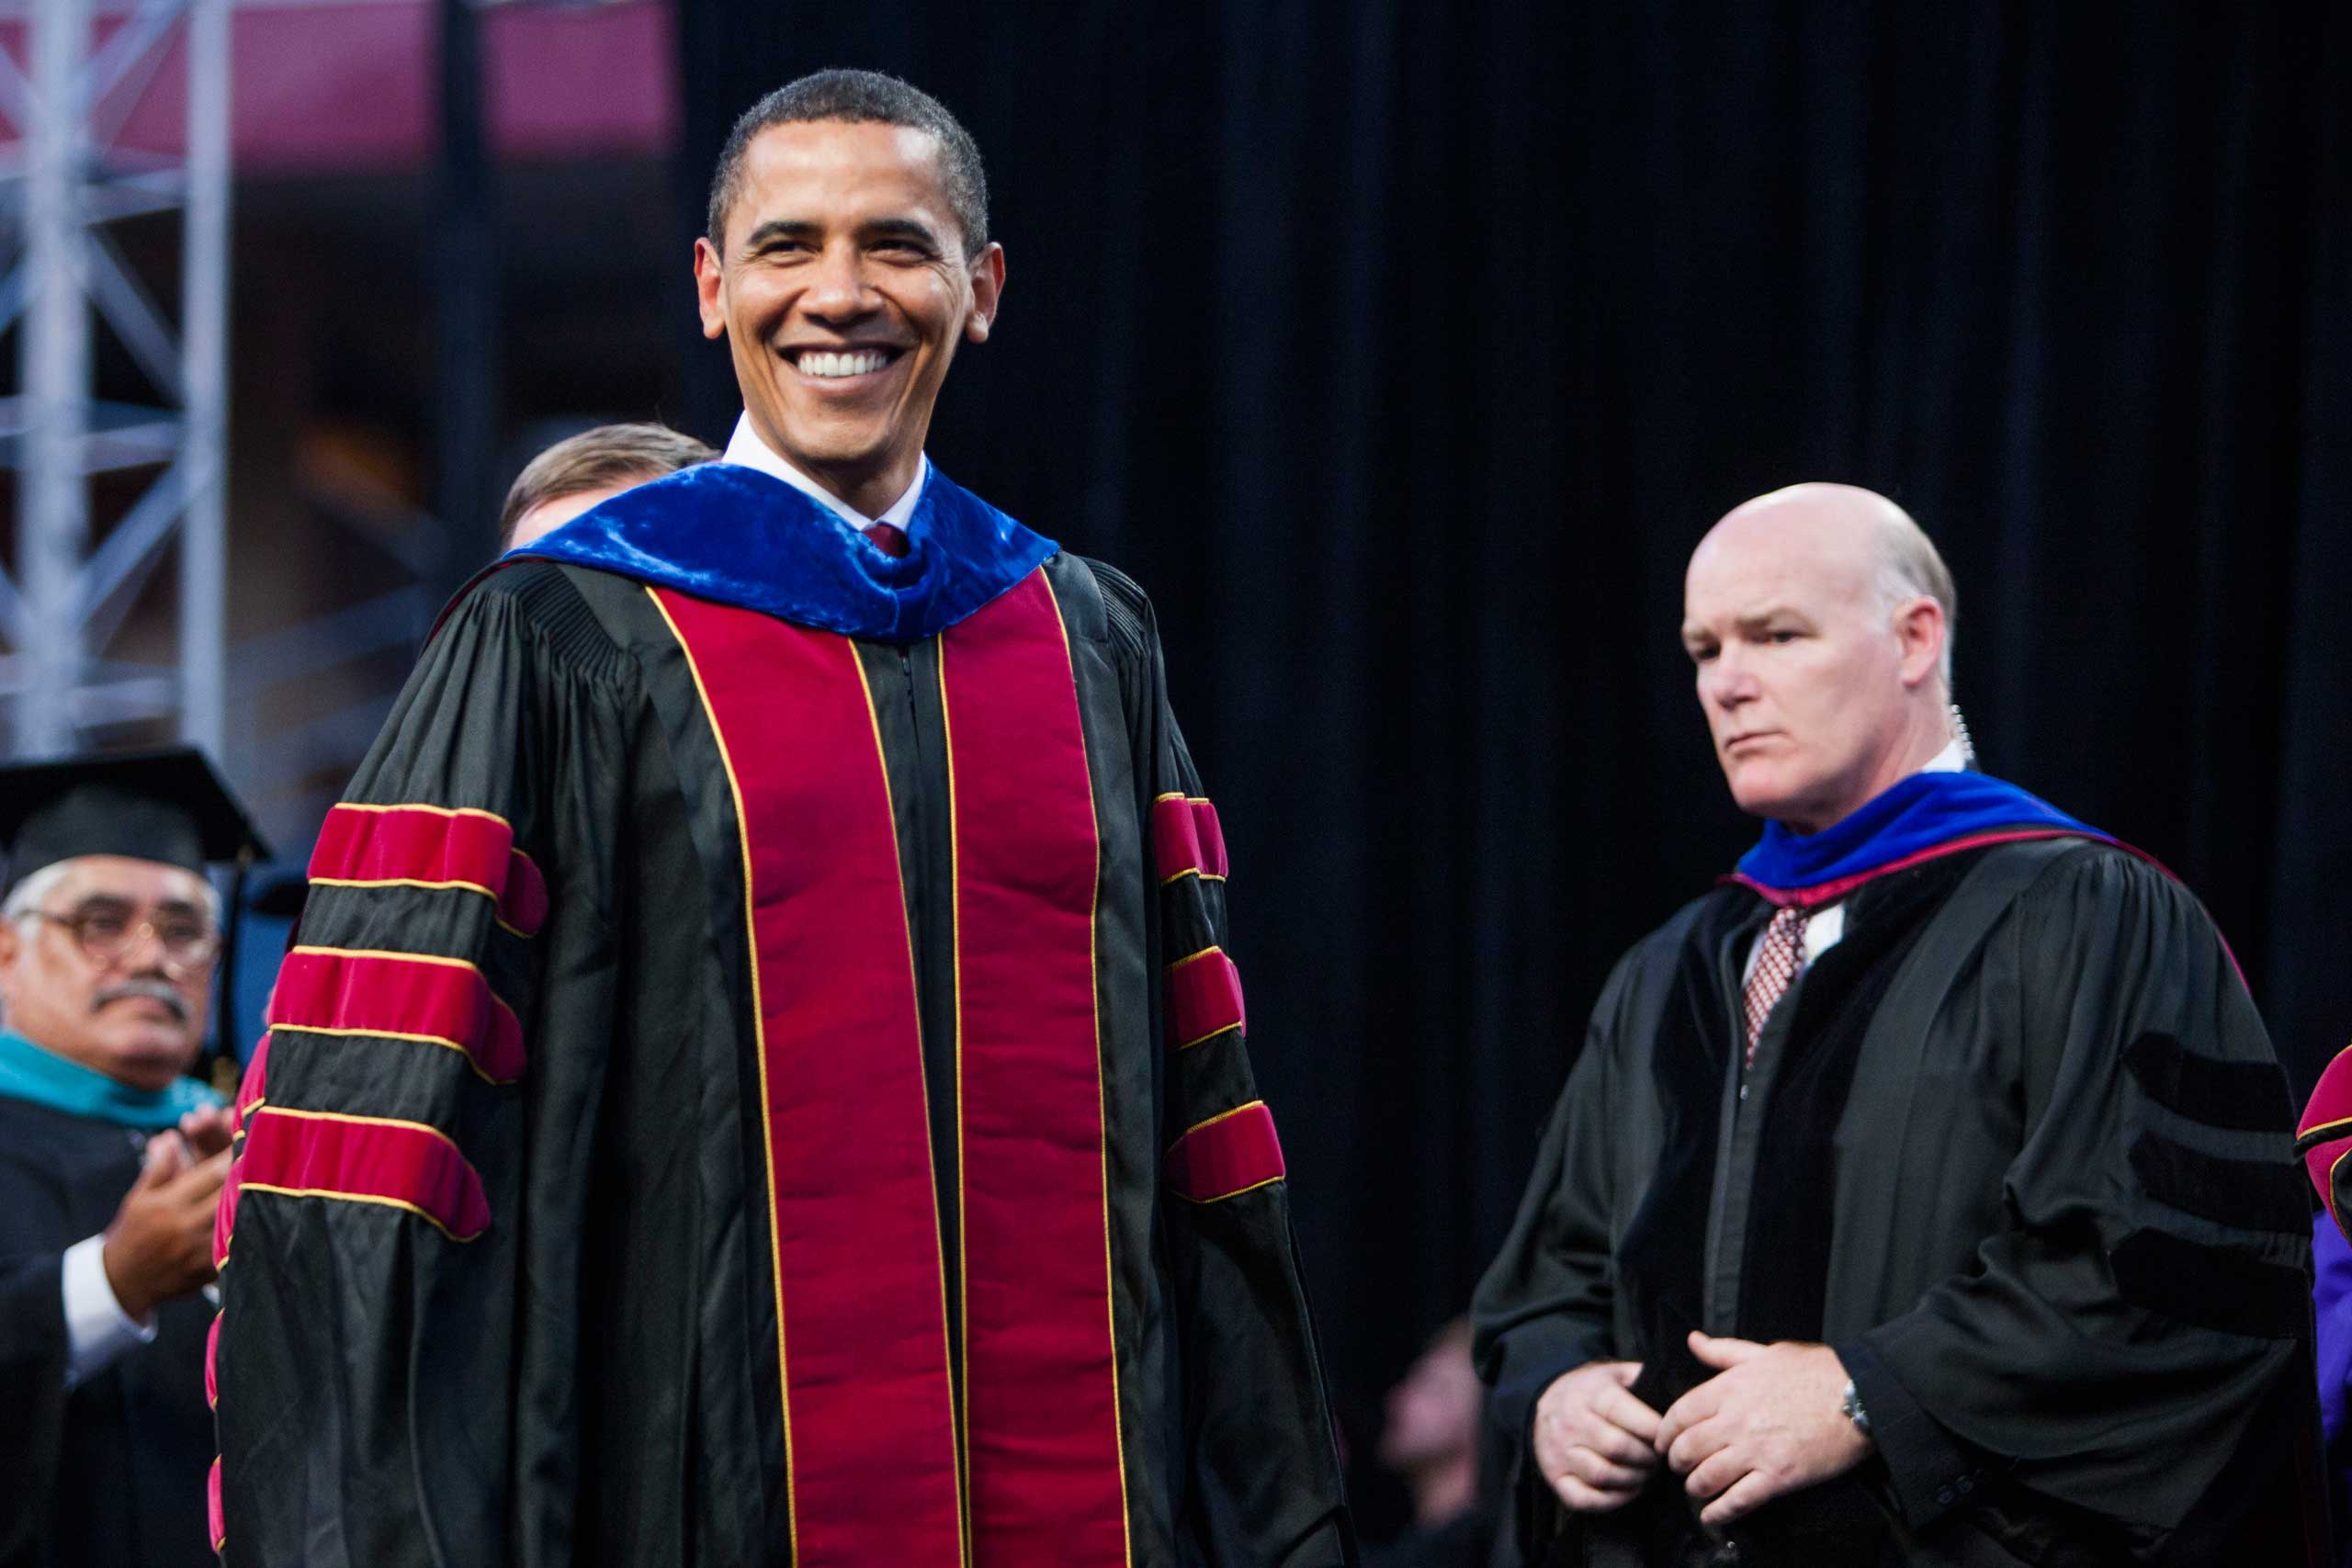 Clancy blends in on stage as Obama speaks at the Arizona State University commencement ceremony at Sun Devil Stadium in Tempe, Ariz. on May 13, 2009.